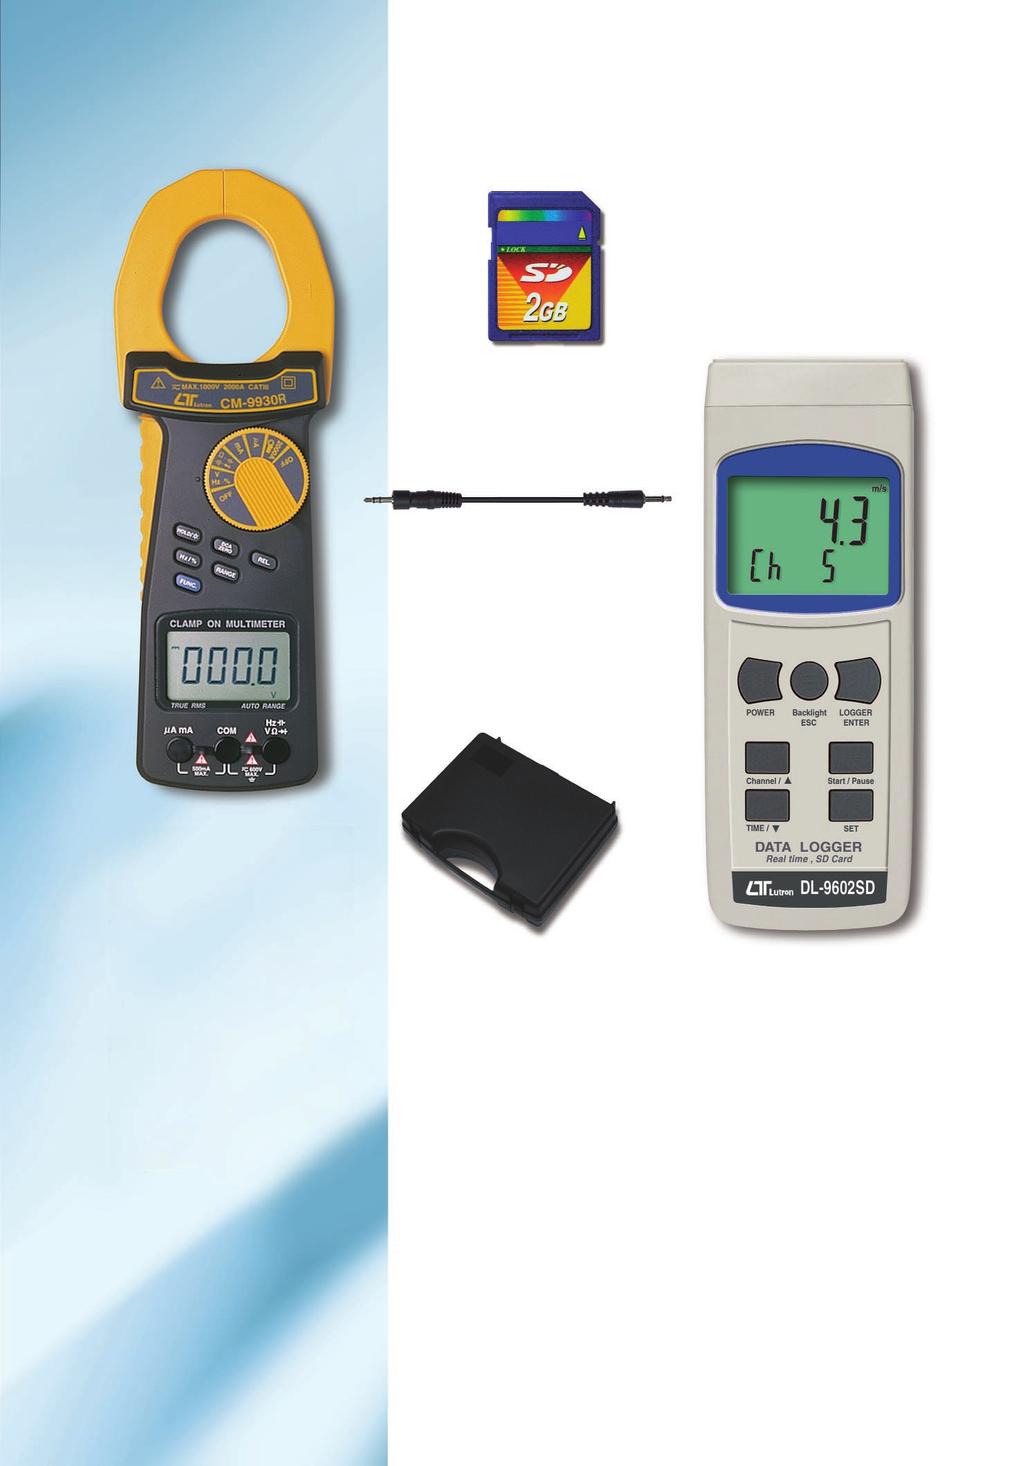 Clamp meter with Data recorder SERIES set UPCB-03 (Included) Optional Hard carrying case CA-08 Clamp meter with Data recorder set /DL-9602SD SET * Complete set are includes : 1. Clamp meter CM-9930R.